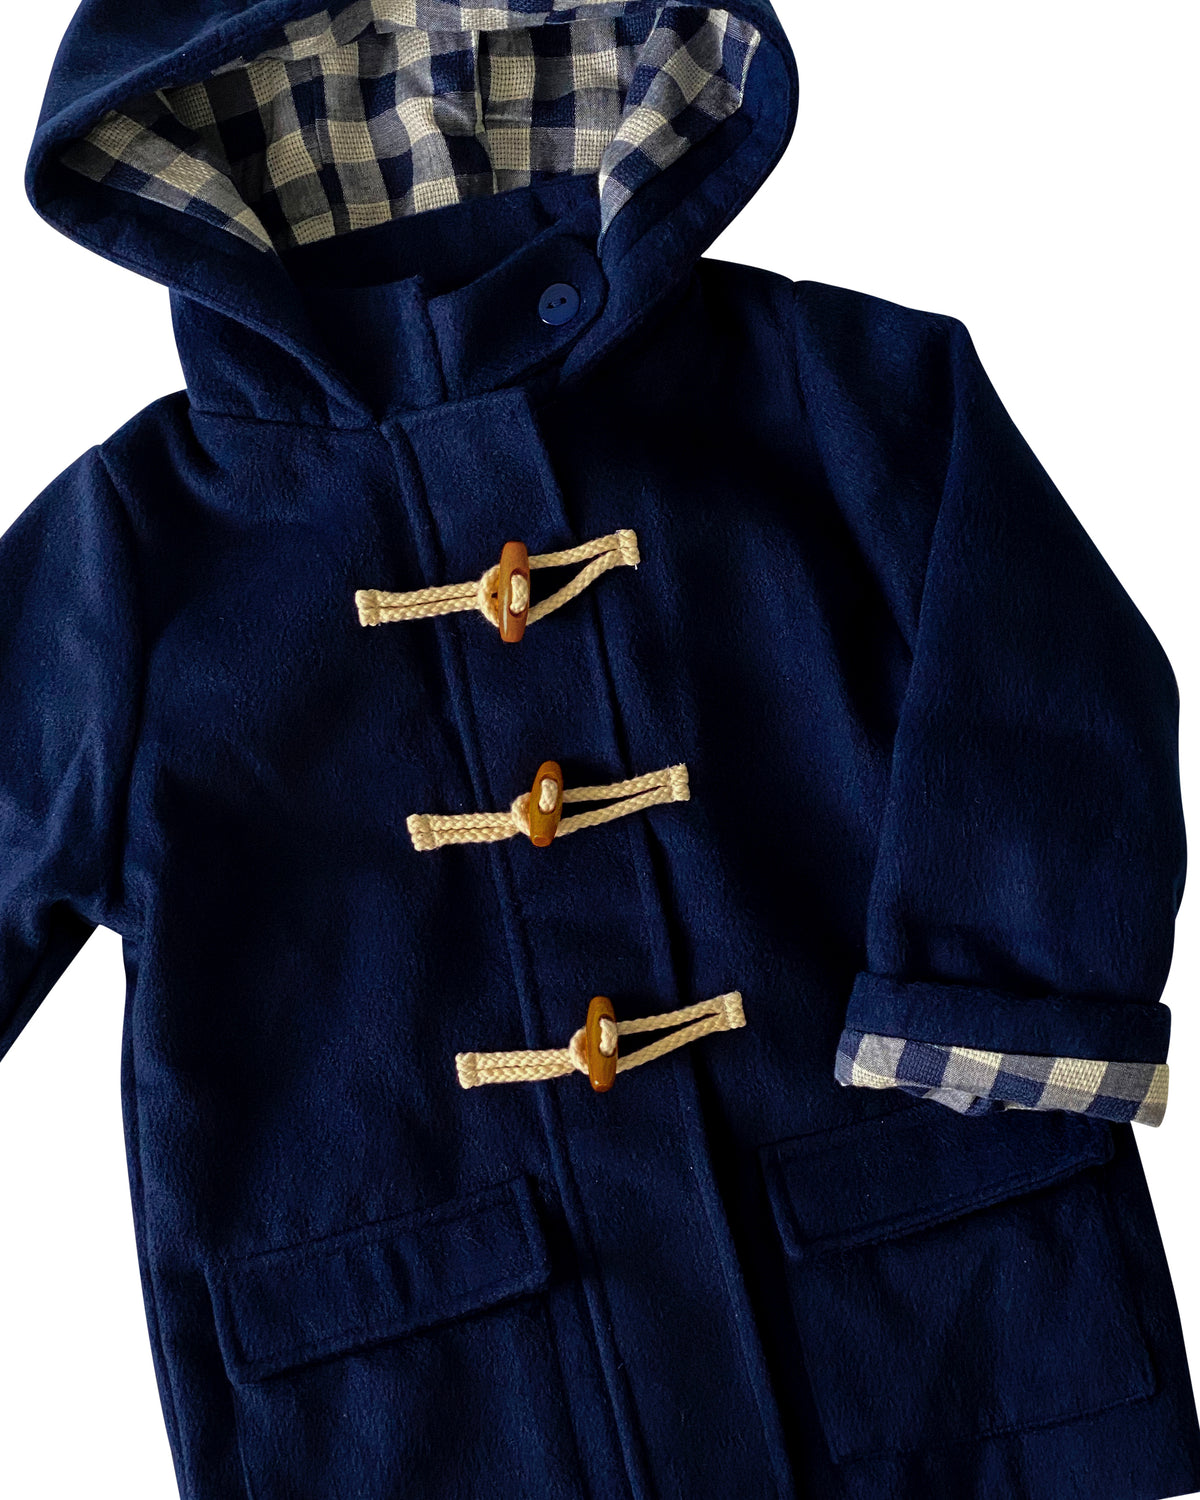 Navy Hooded Coat with Toggle Buttons